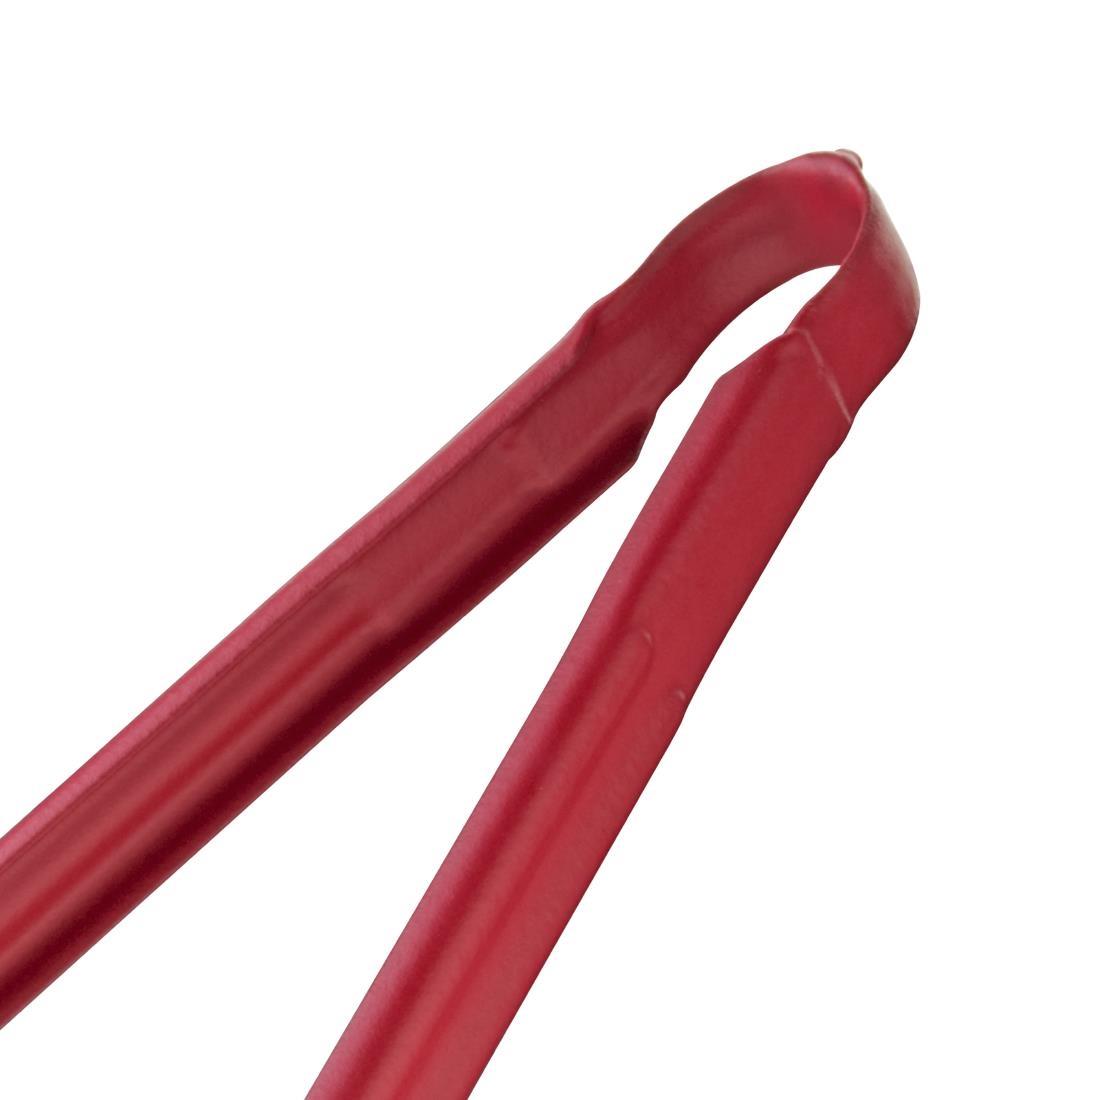 Hygiplas Colour Coded Serving Tong Red 405mm - HC854  - 4